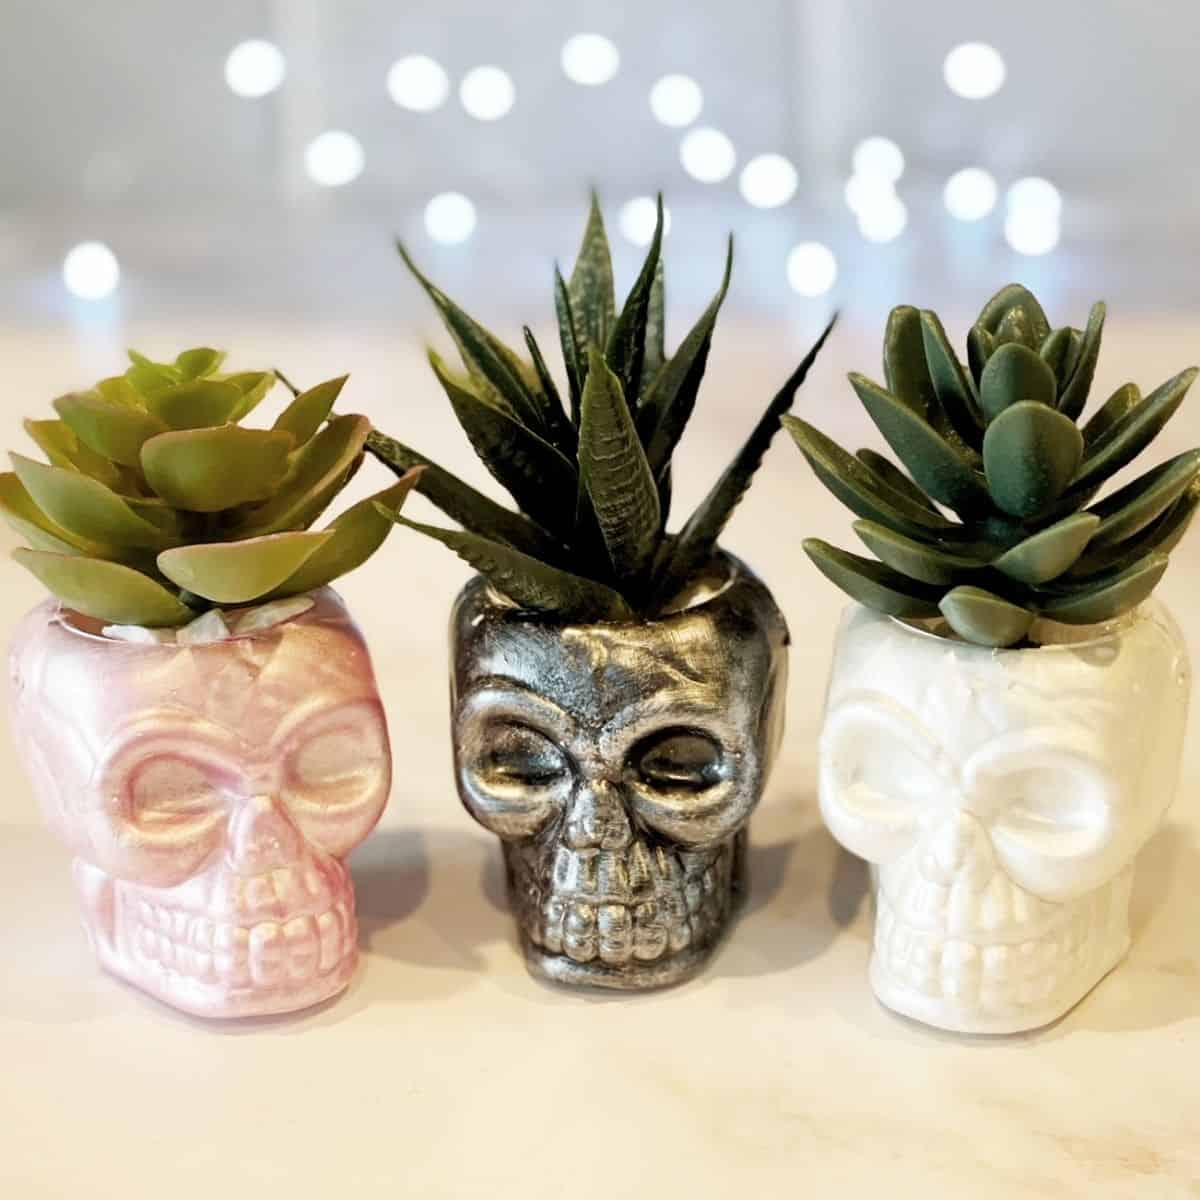 3 Skull Crafts To Make This Halloween